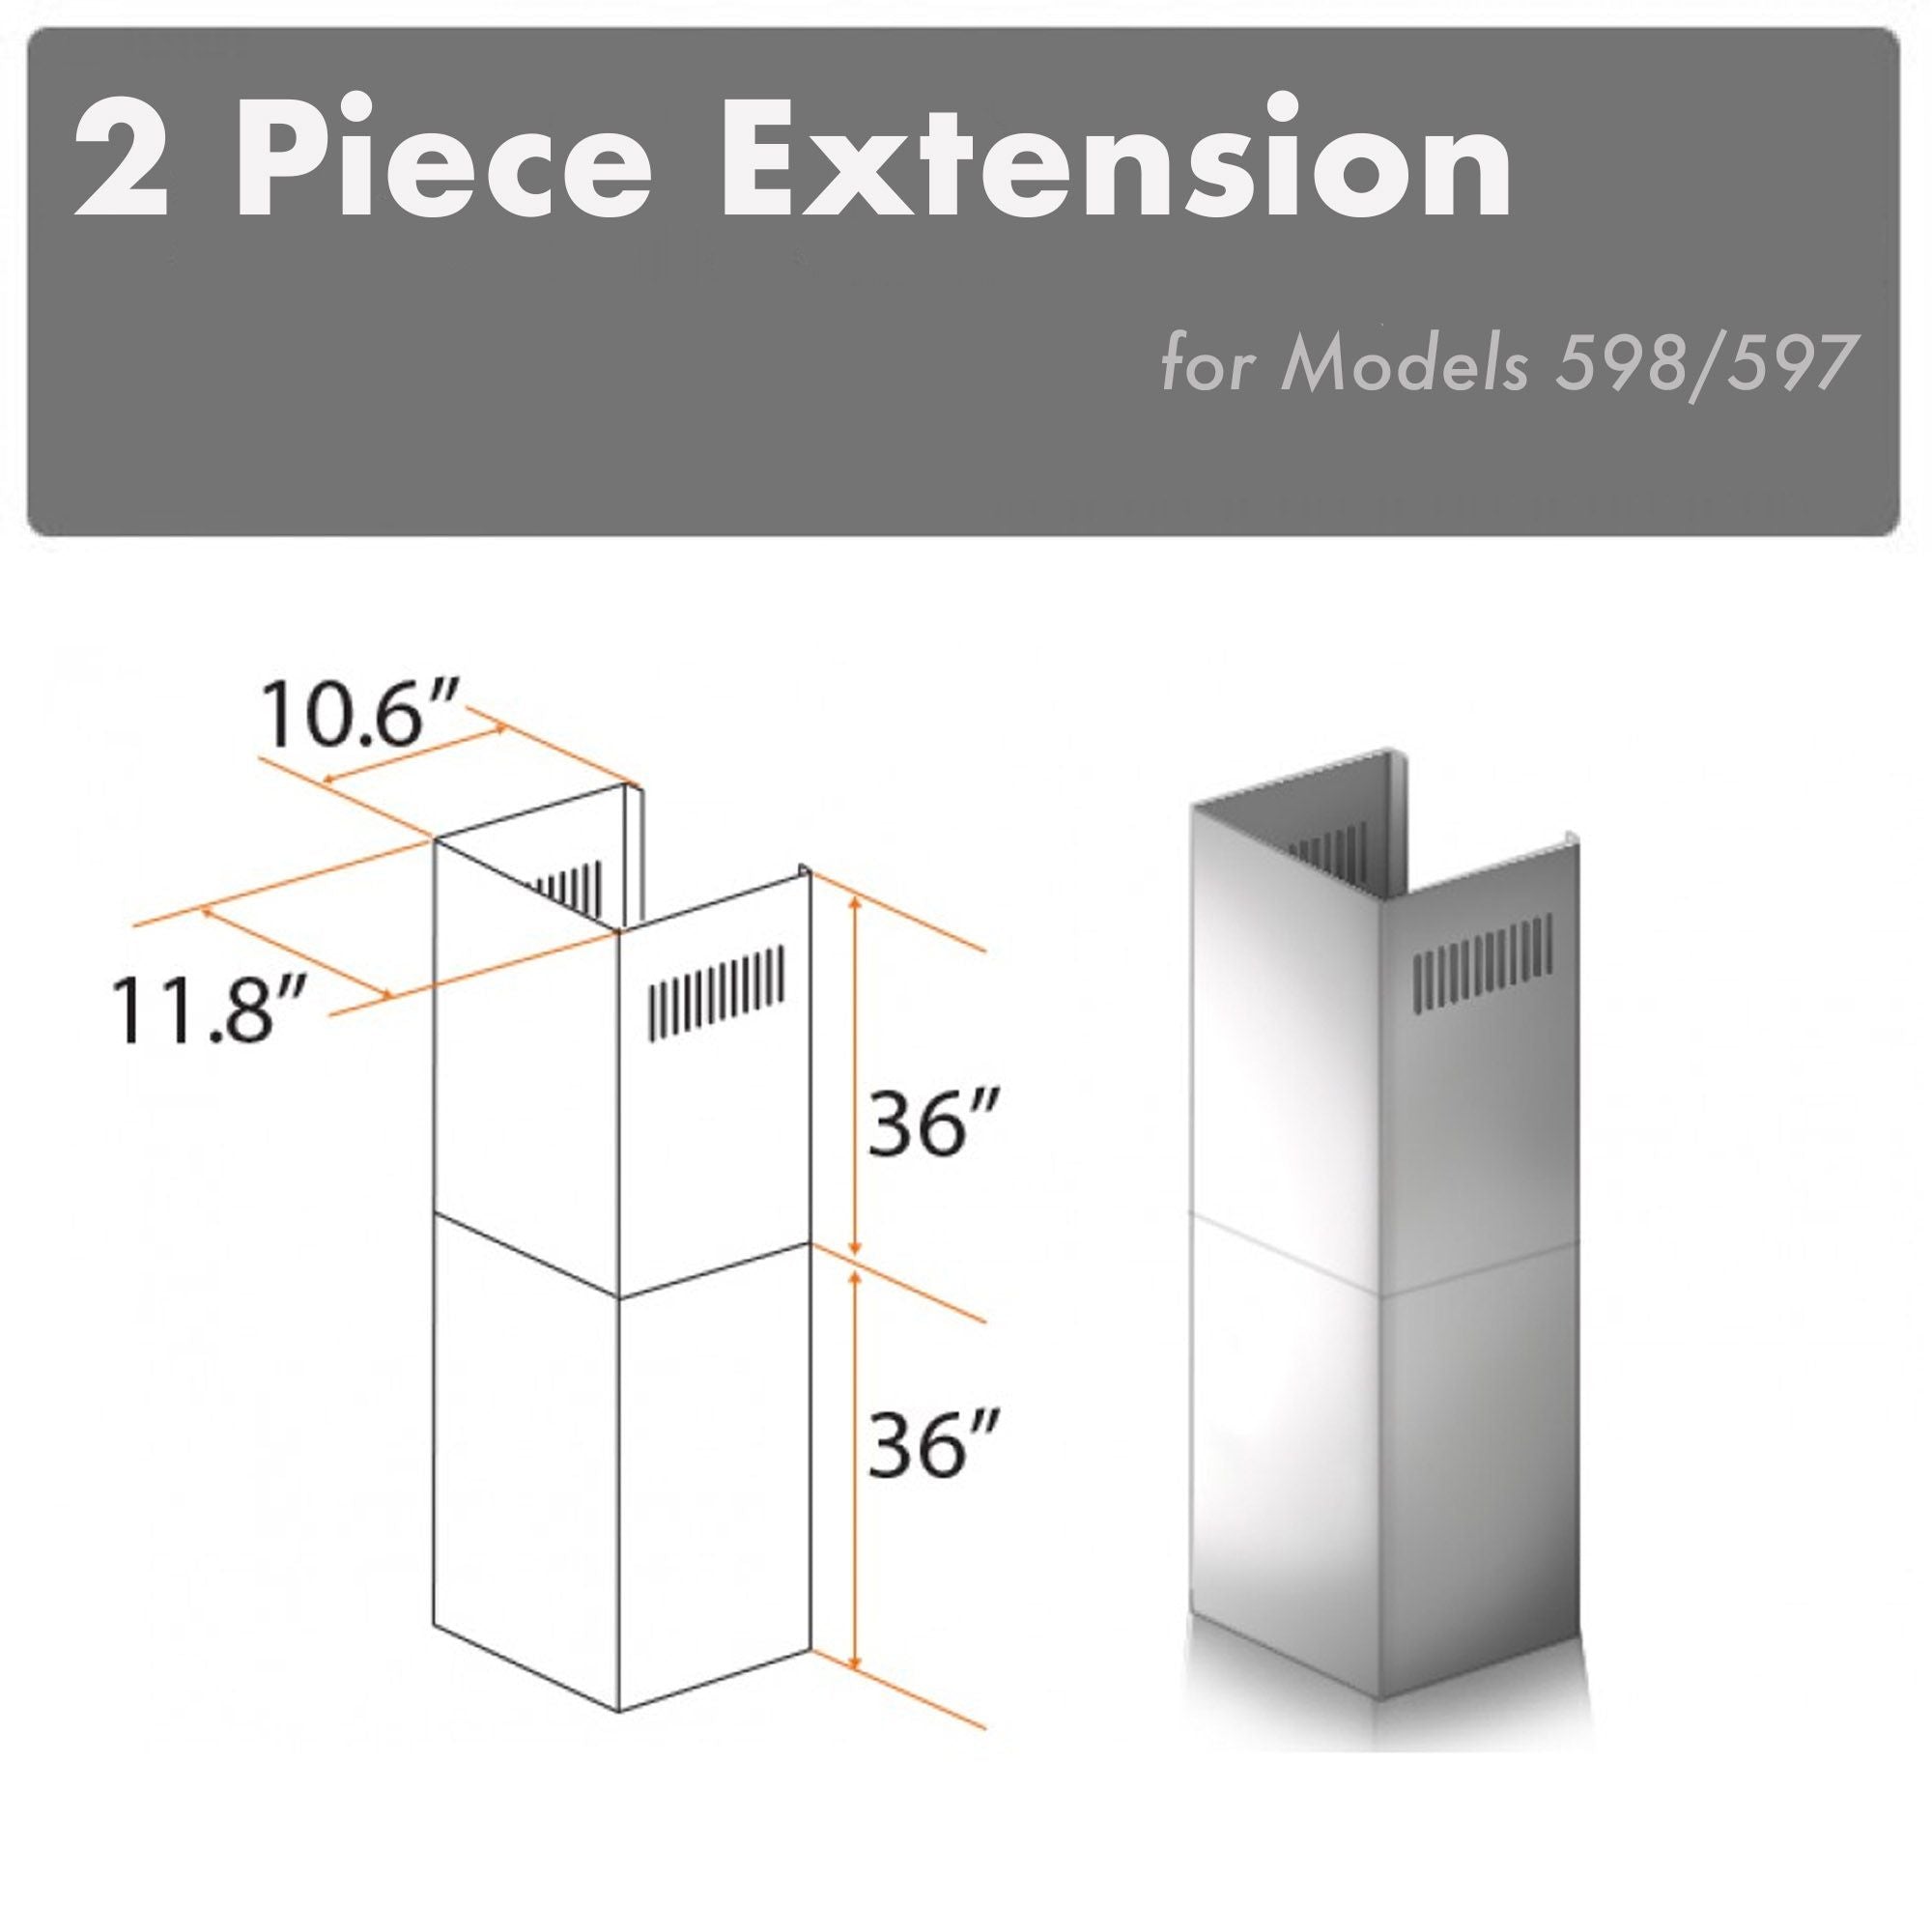 ZLINE 2-36" Chimney Extensions for 10 ft. to 12 ft. Ceilings (2PCEXT-587/597) - Rustic Kitchen & Bath - Range Hood Accessories - ZLINE Kitchen and Bath